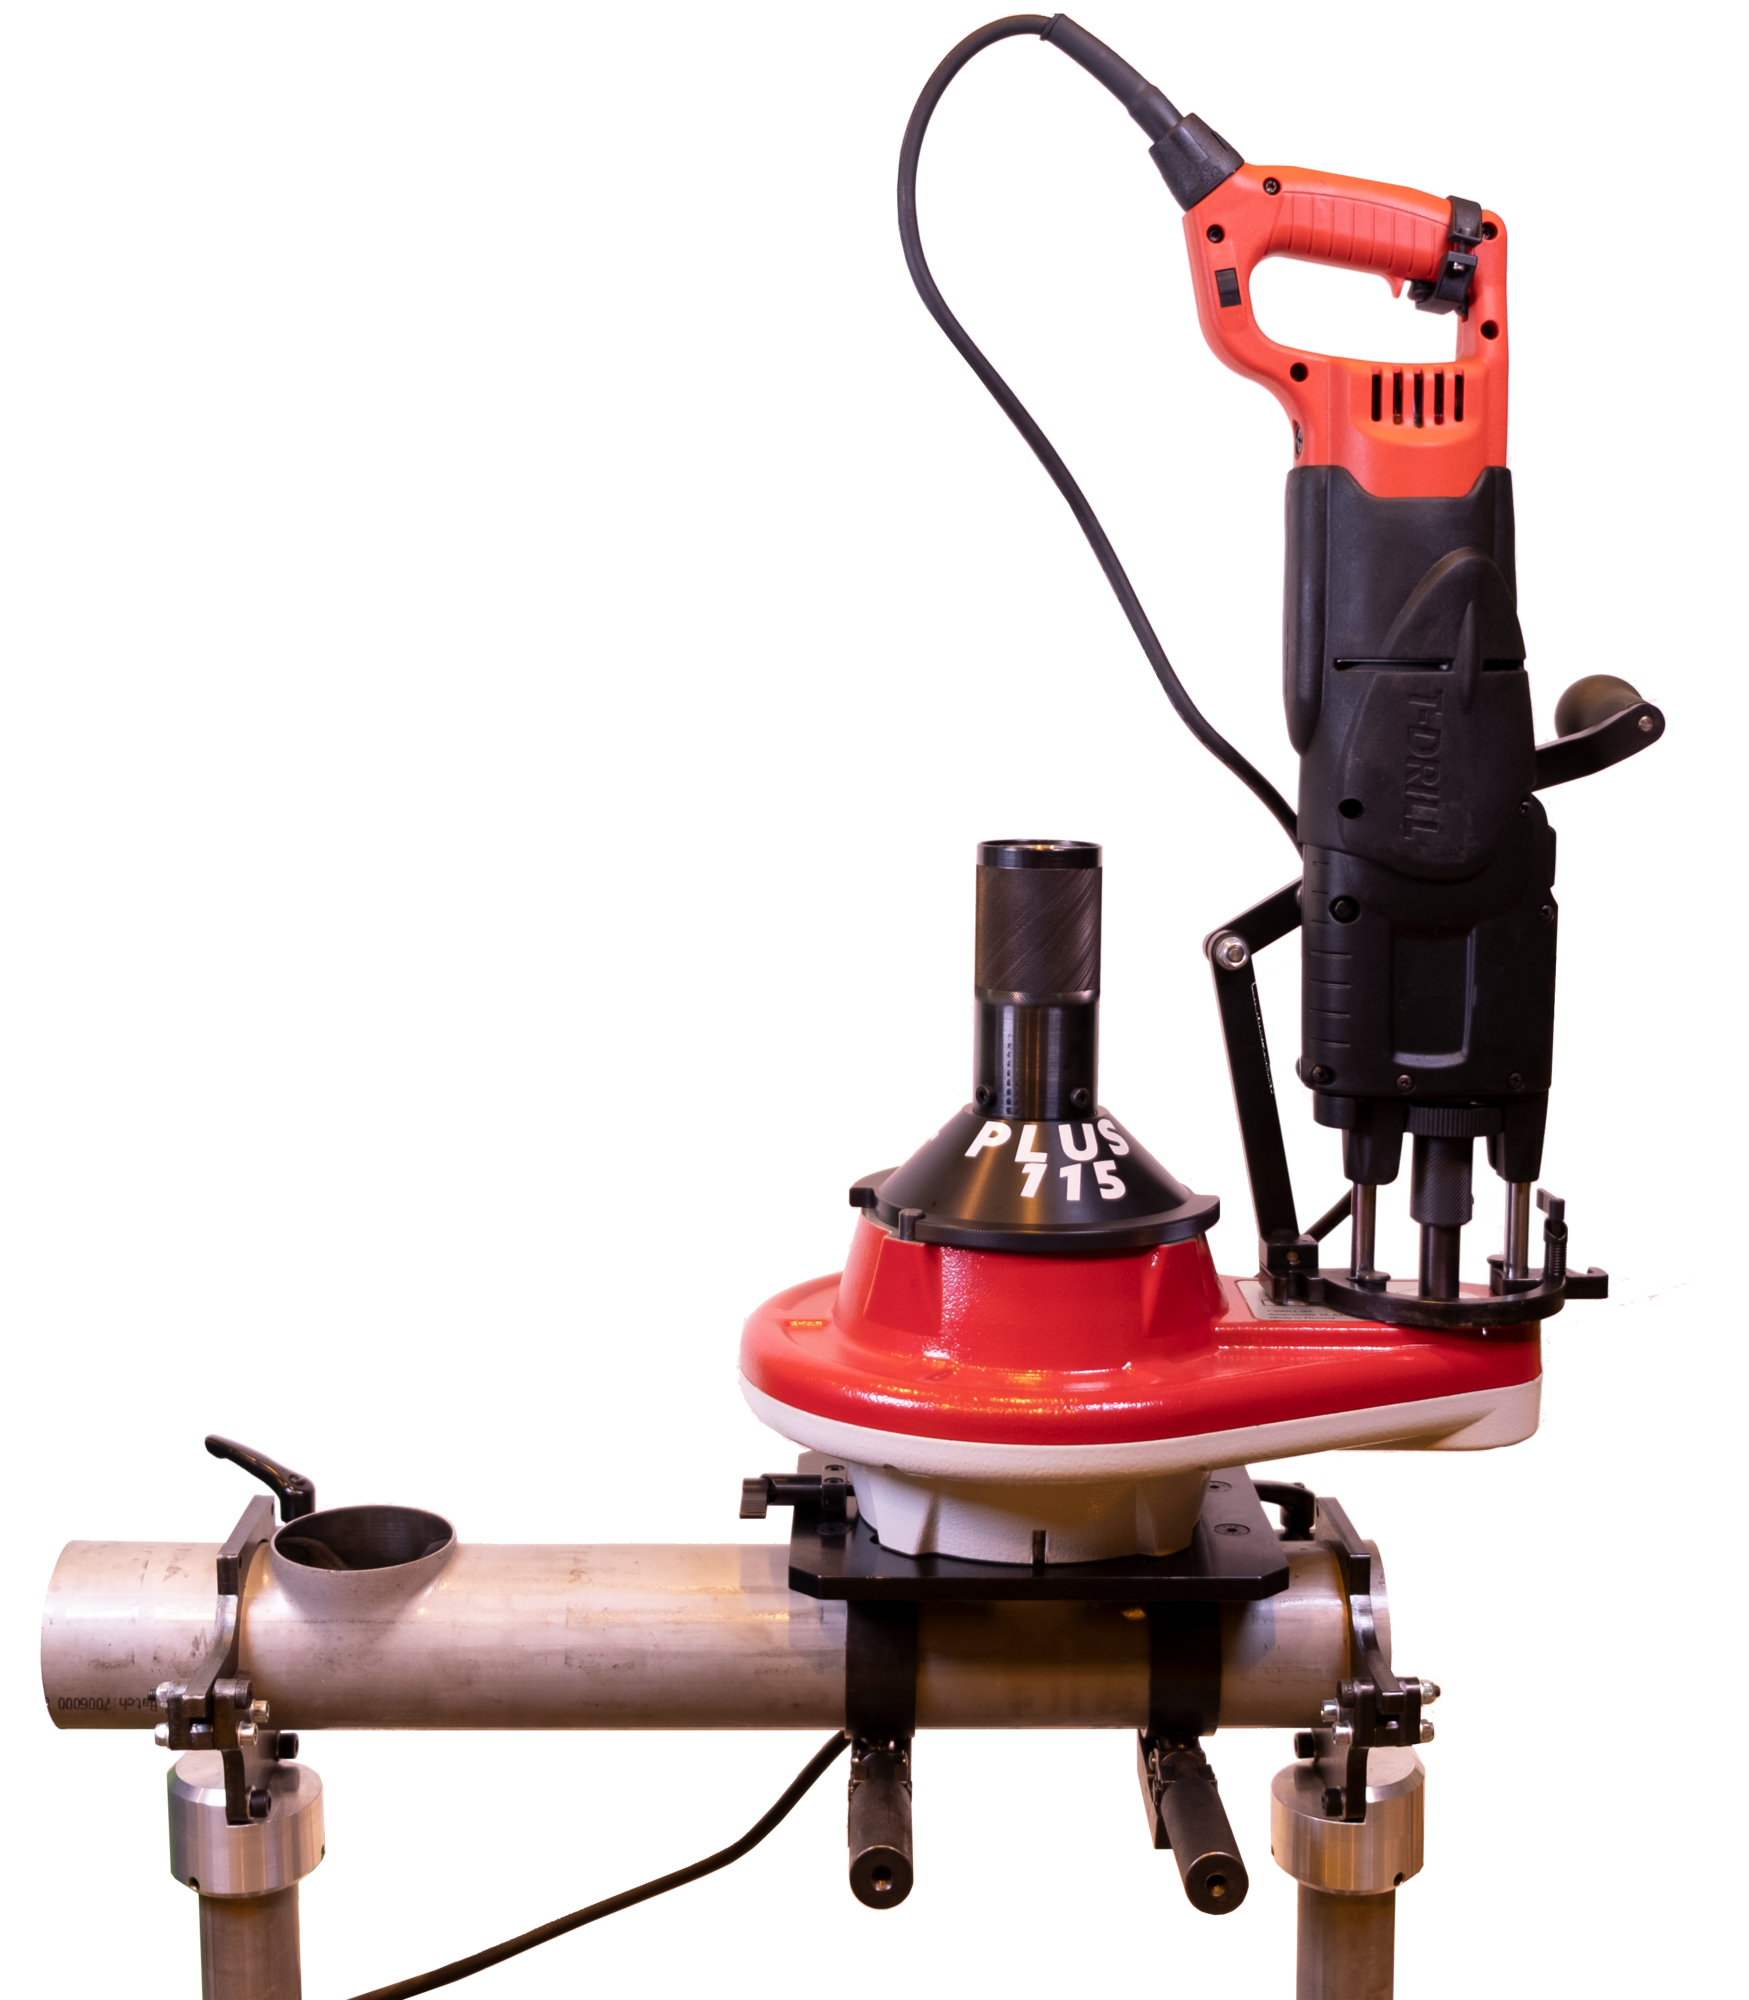 T-DRILL PLUS 115 SS Portable Collaring System for Stainless Steel Tube Branching